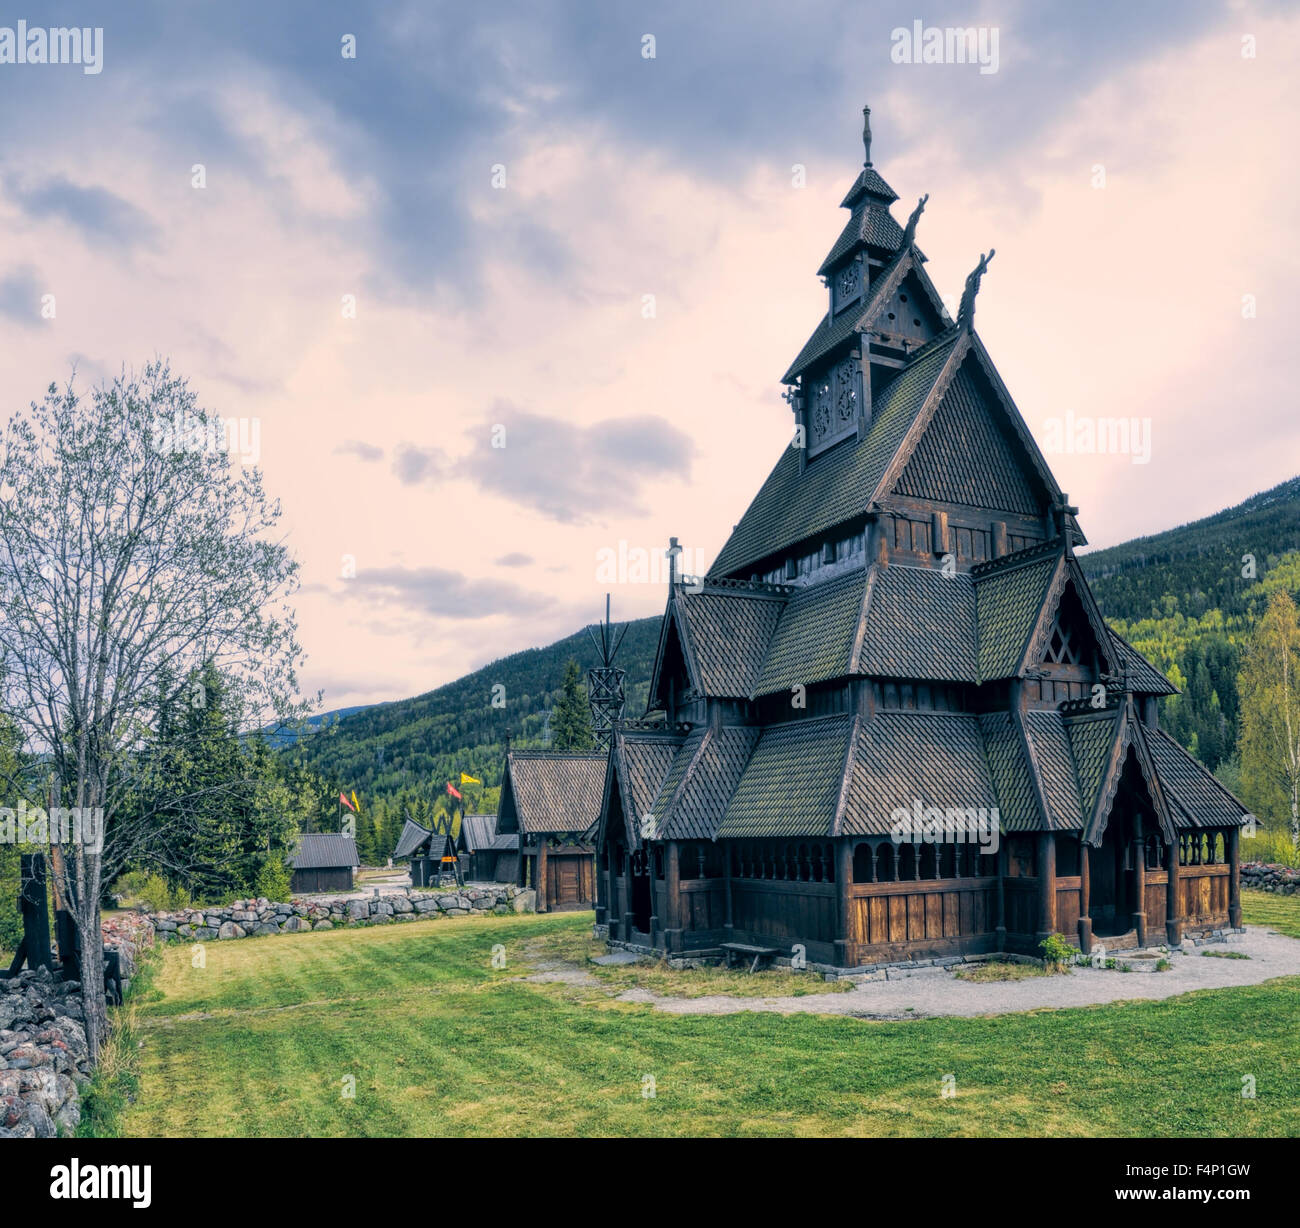 Gol Stave Church in Norway on cloudy day Stock Photo